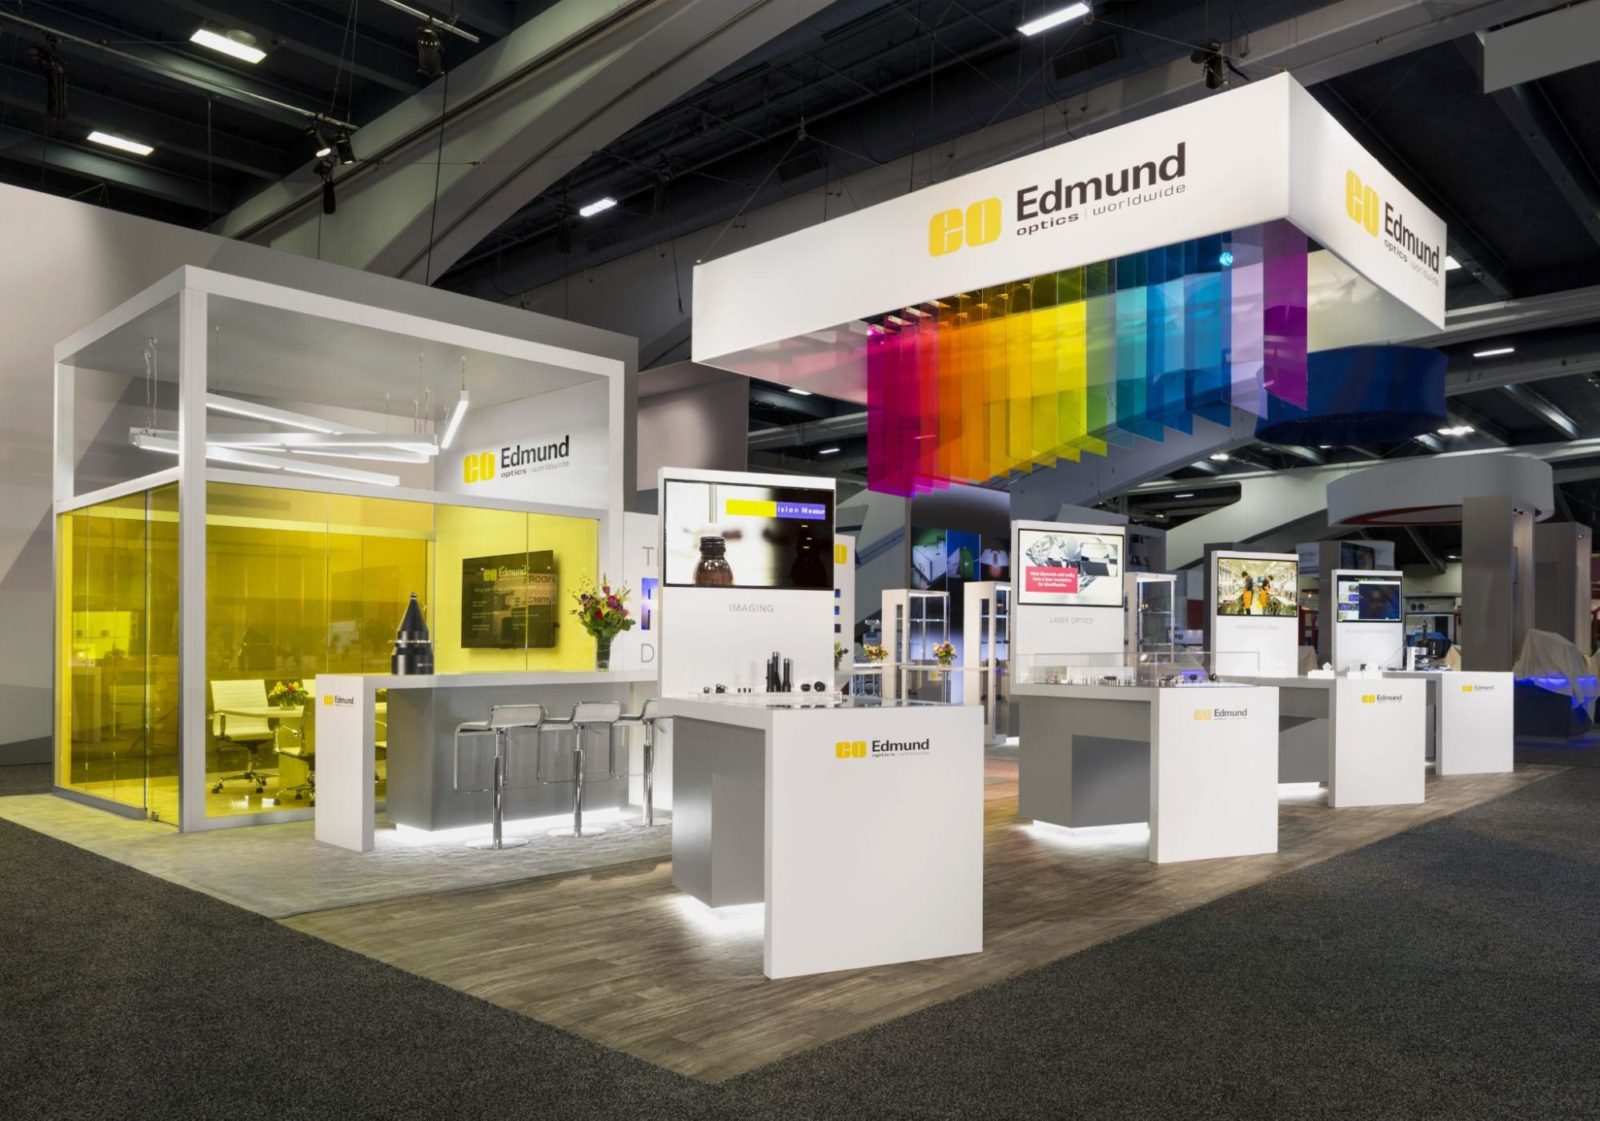 Trade Show Design Trends: How to Stand Out on the Show Floor